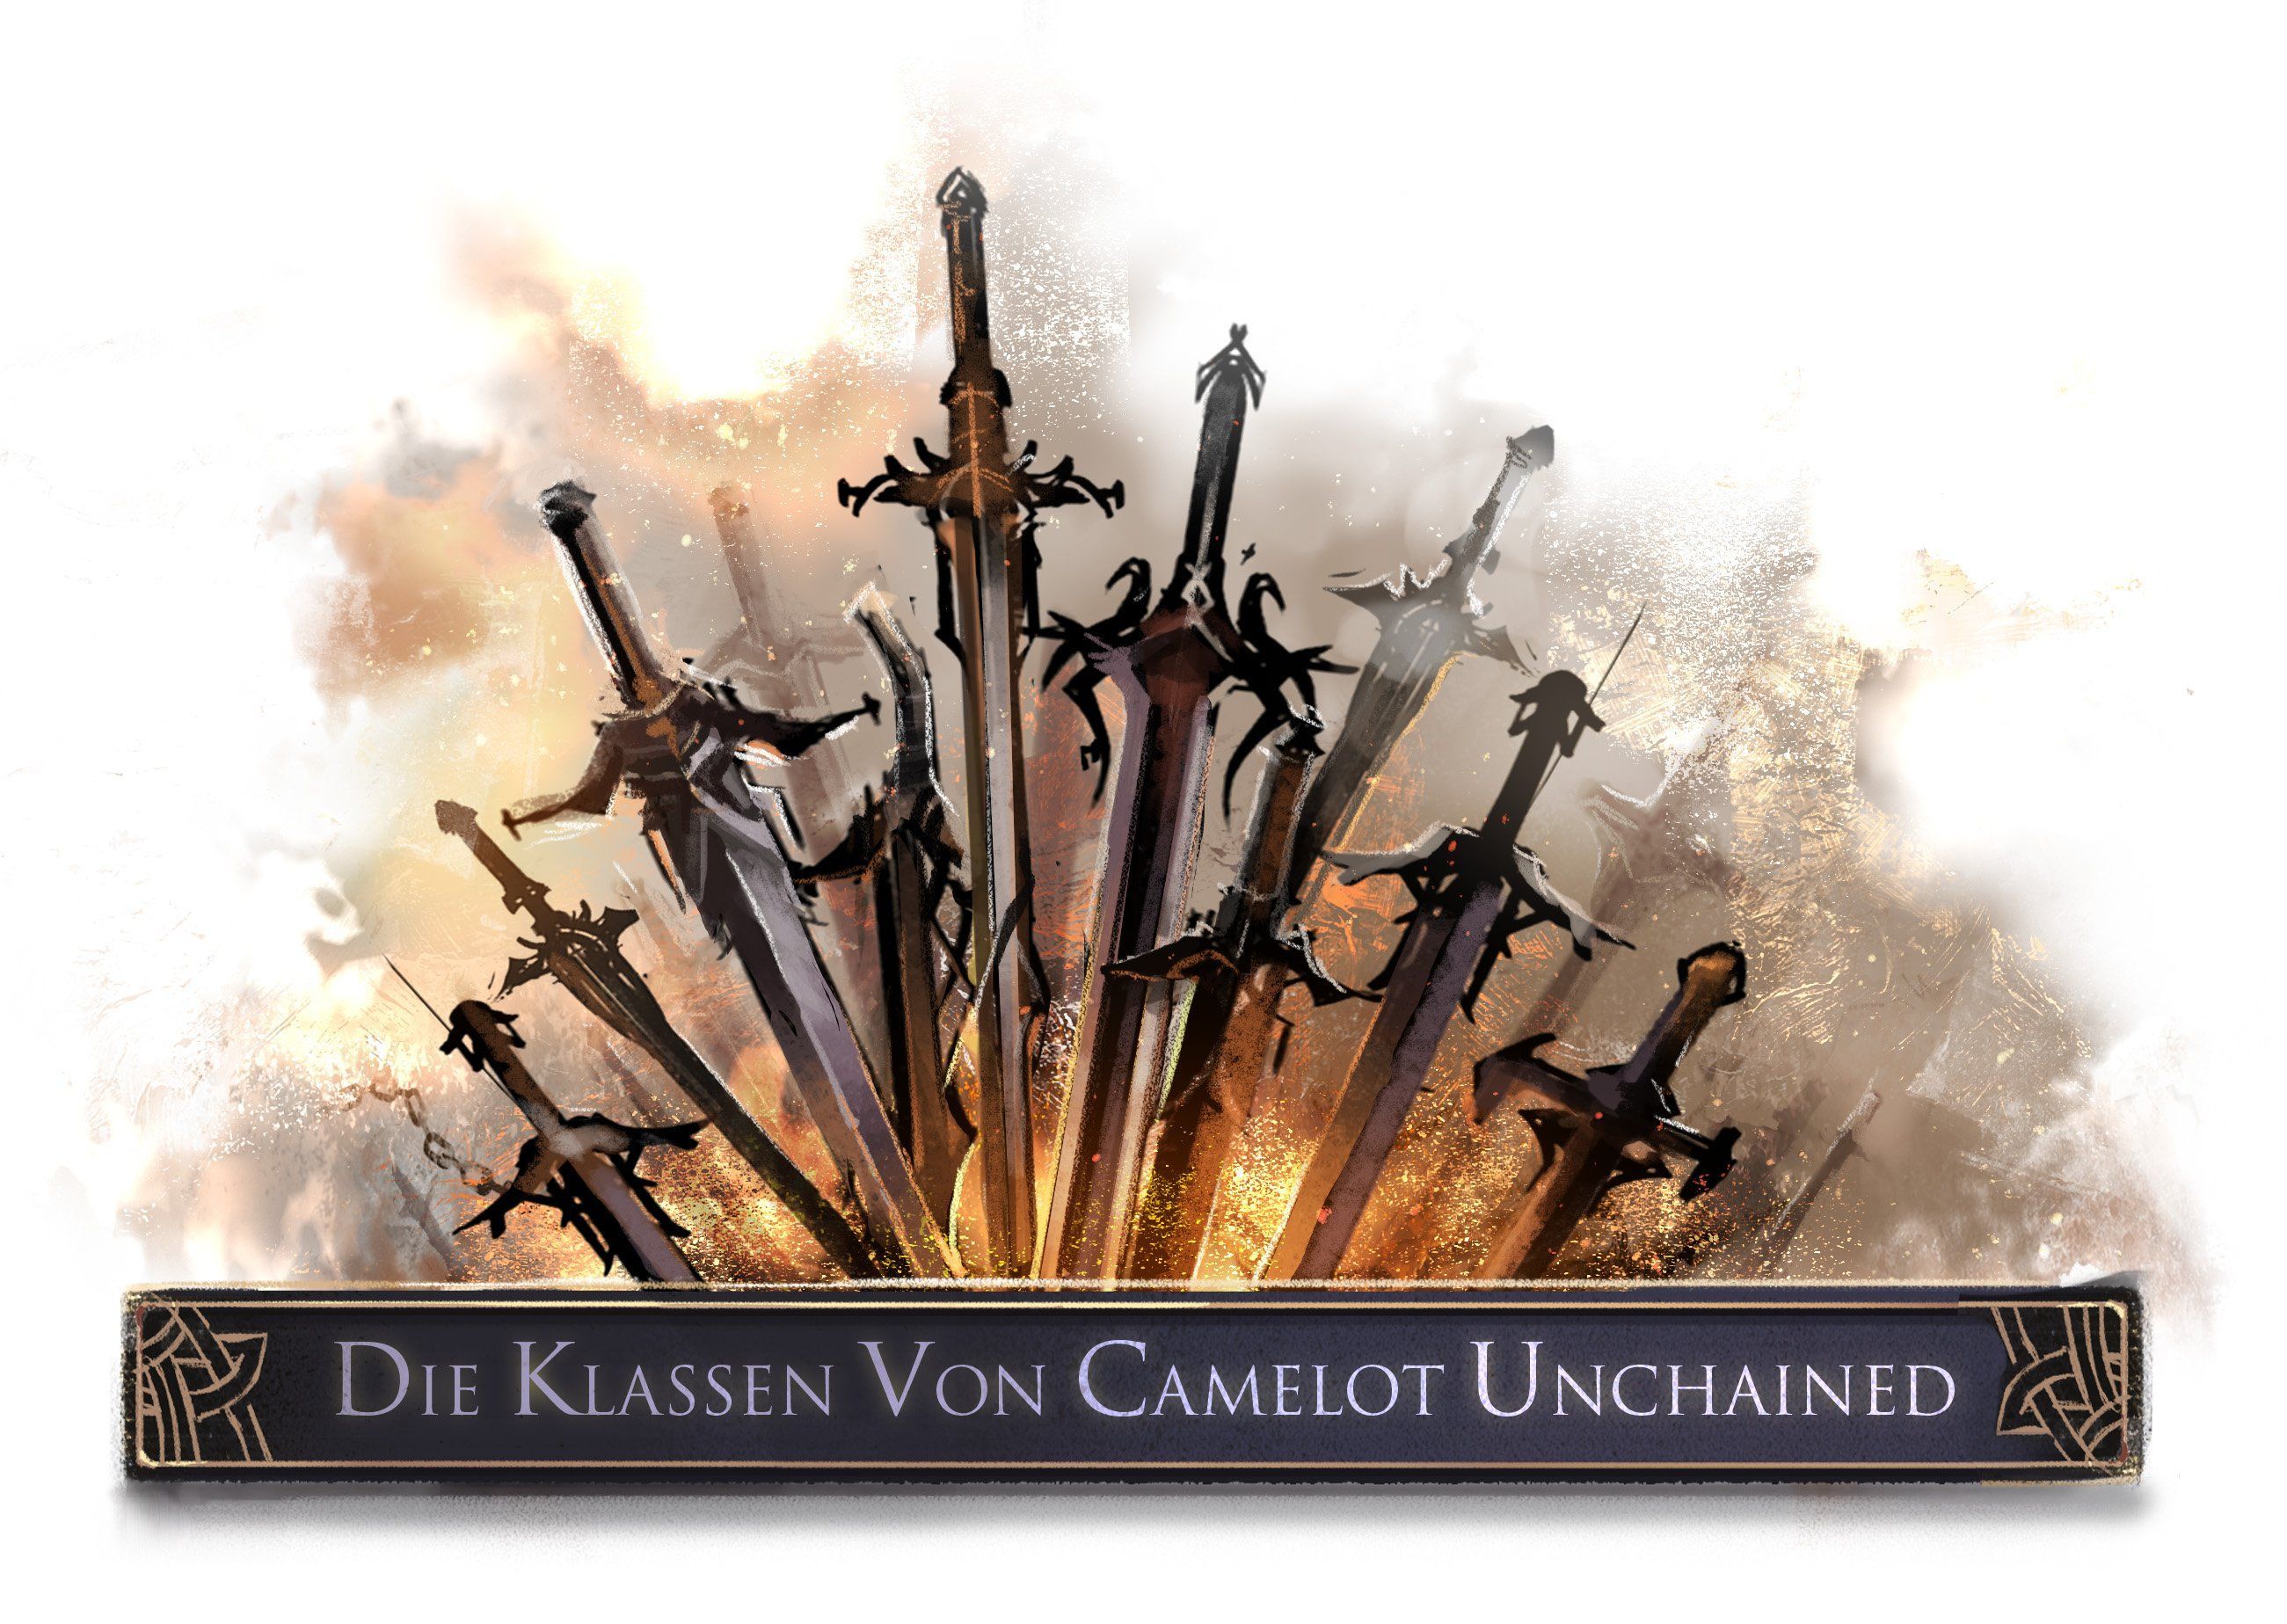 CAMELOT UNCHAINED counter revolutionary fantasy action mmo rpg ...